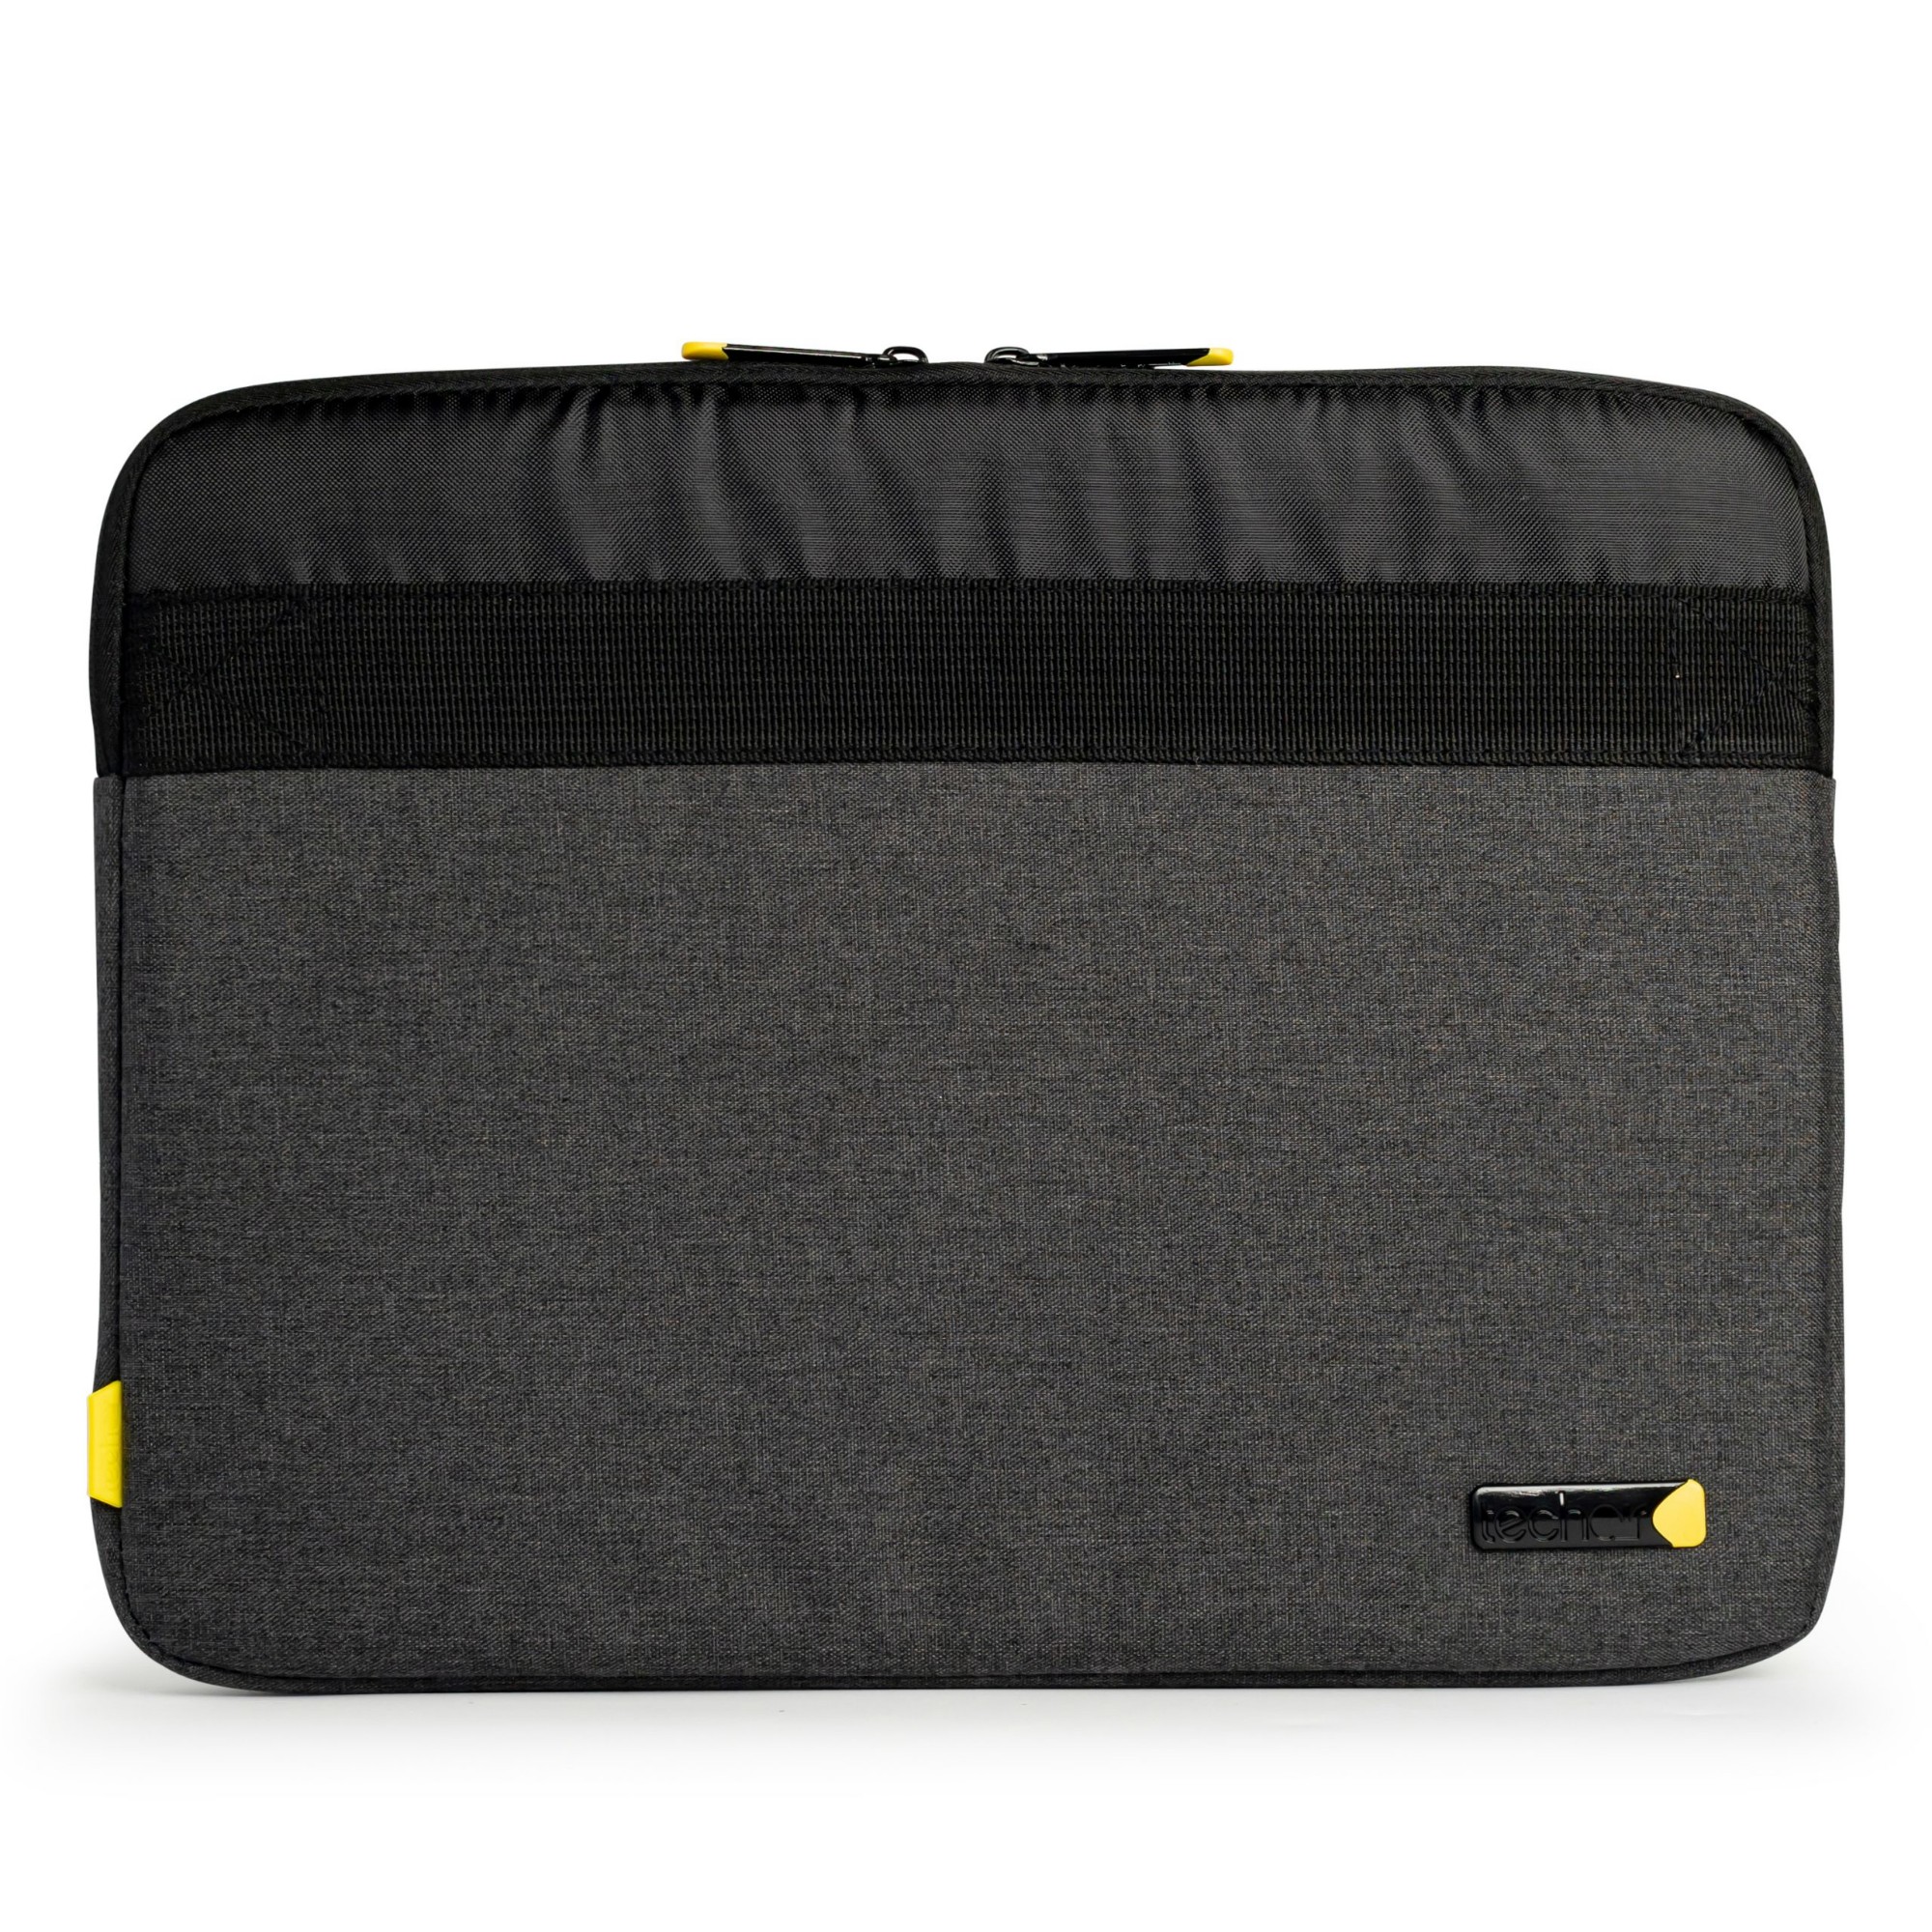 TAECV010 TECH AIR 12-14.1 Eco Sleeve Manufactured from recycled plastic bottles; on average 14 x 250ml plastic bottles or 10 x 350ml are recycled into each case. 2 tone styled product contrasts a textured grey main fabric with a webbing band and a finer woven black fabric.